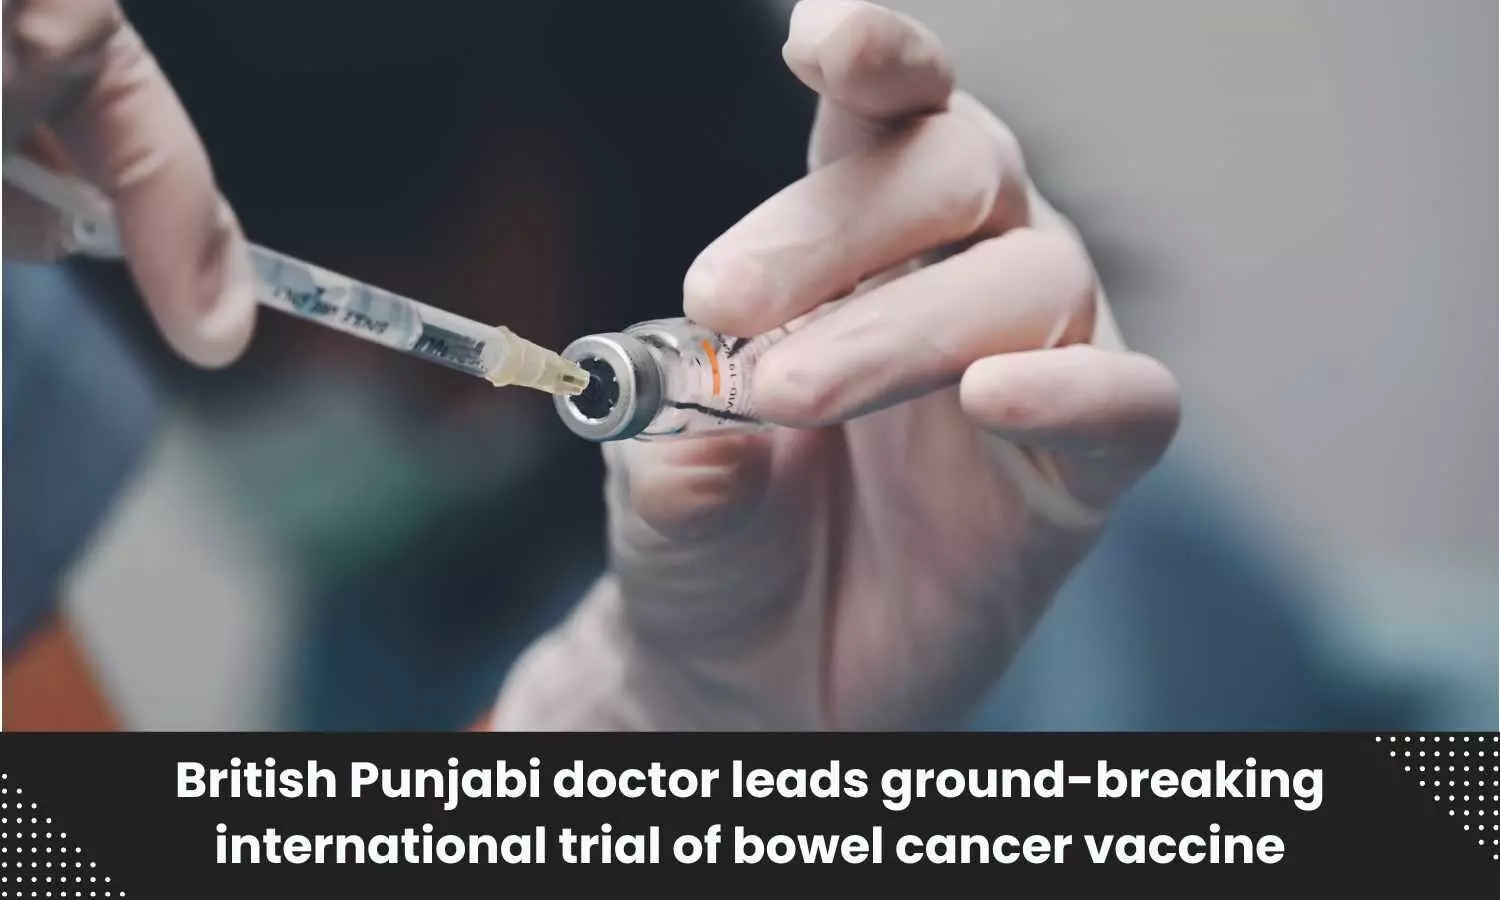 British Indian doctor to undertake ground-breaking trial of bowel cancer vaccine